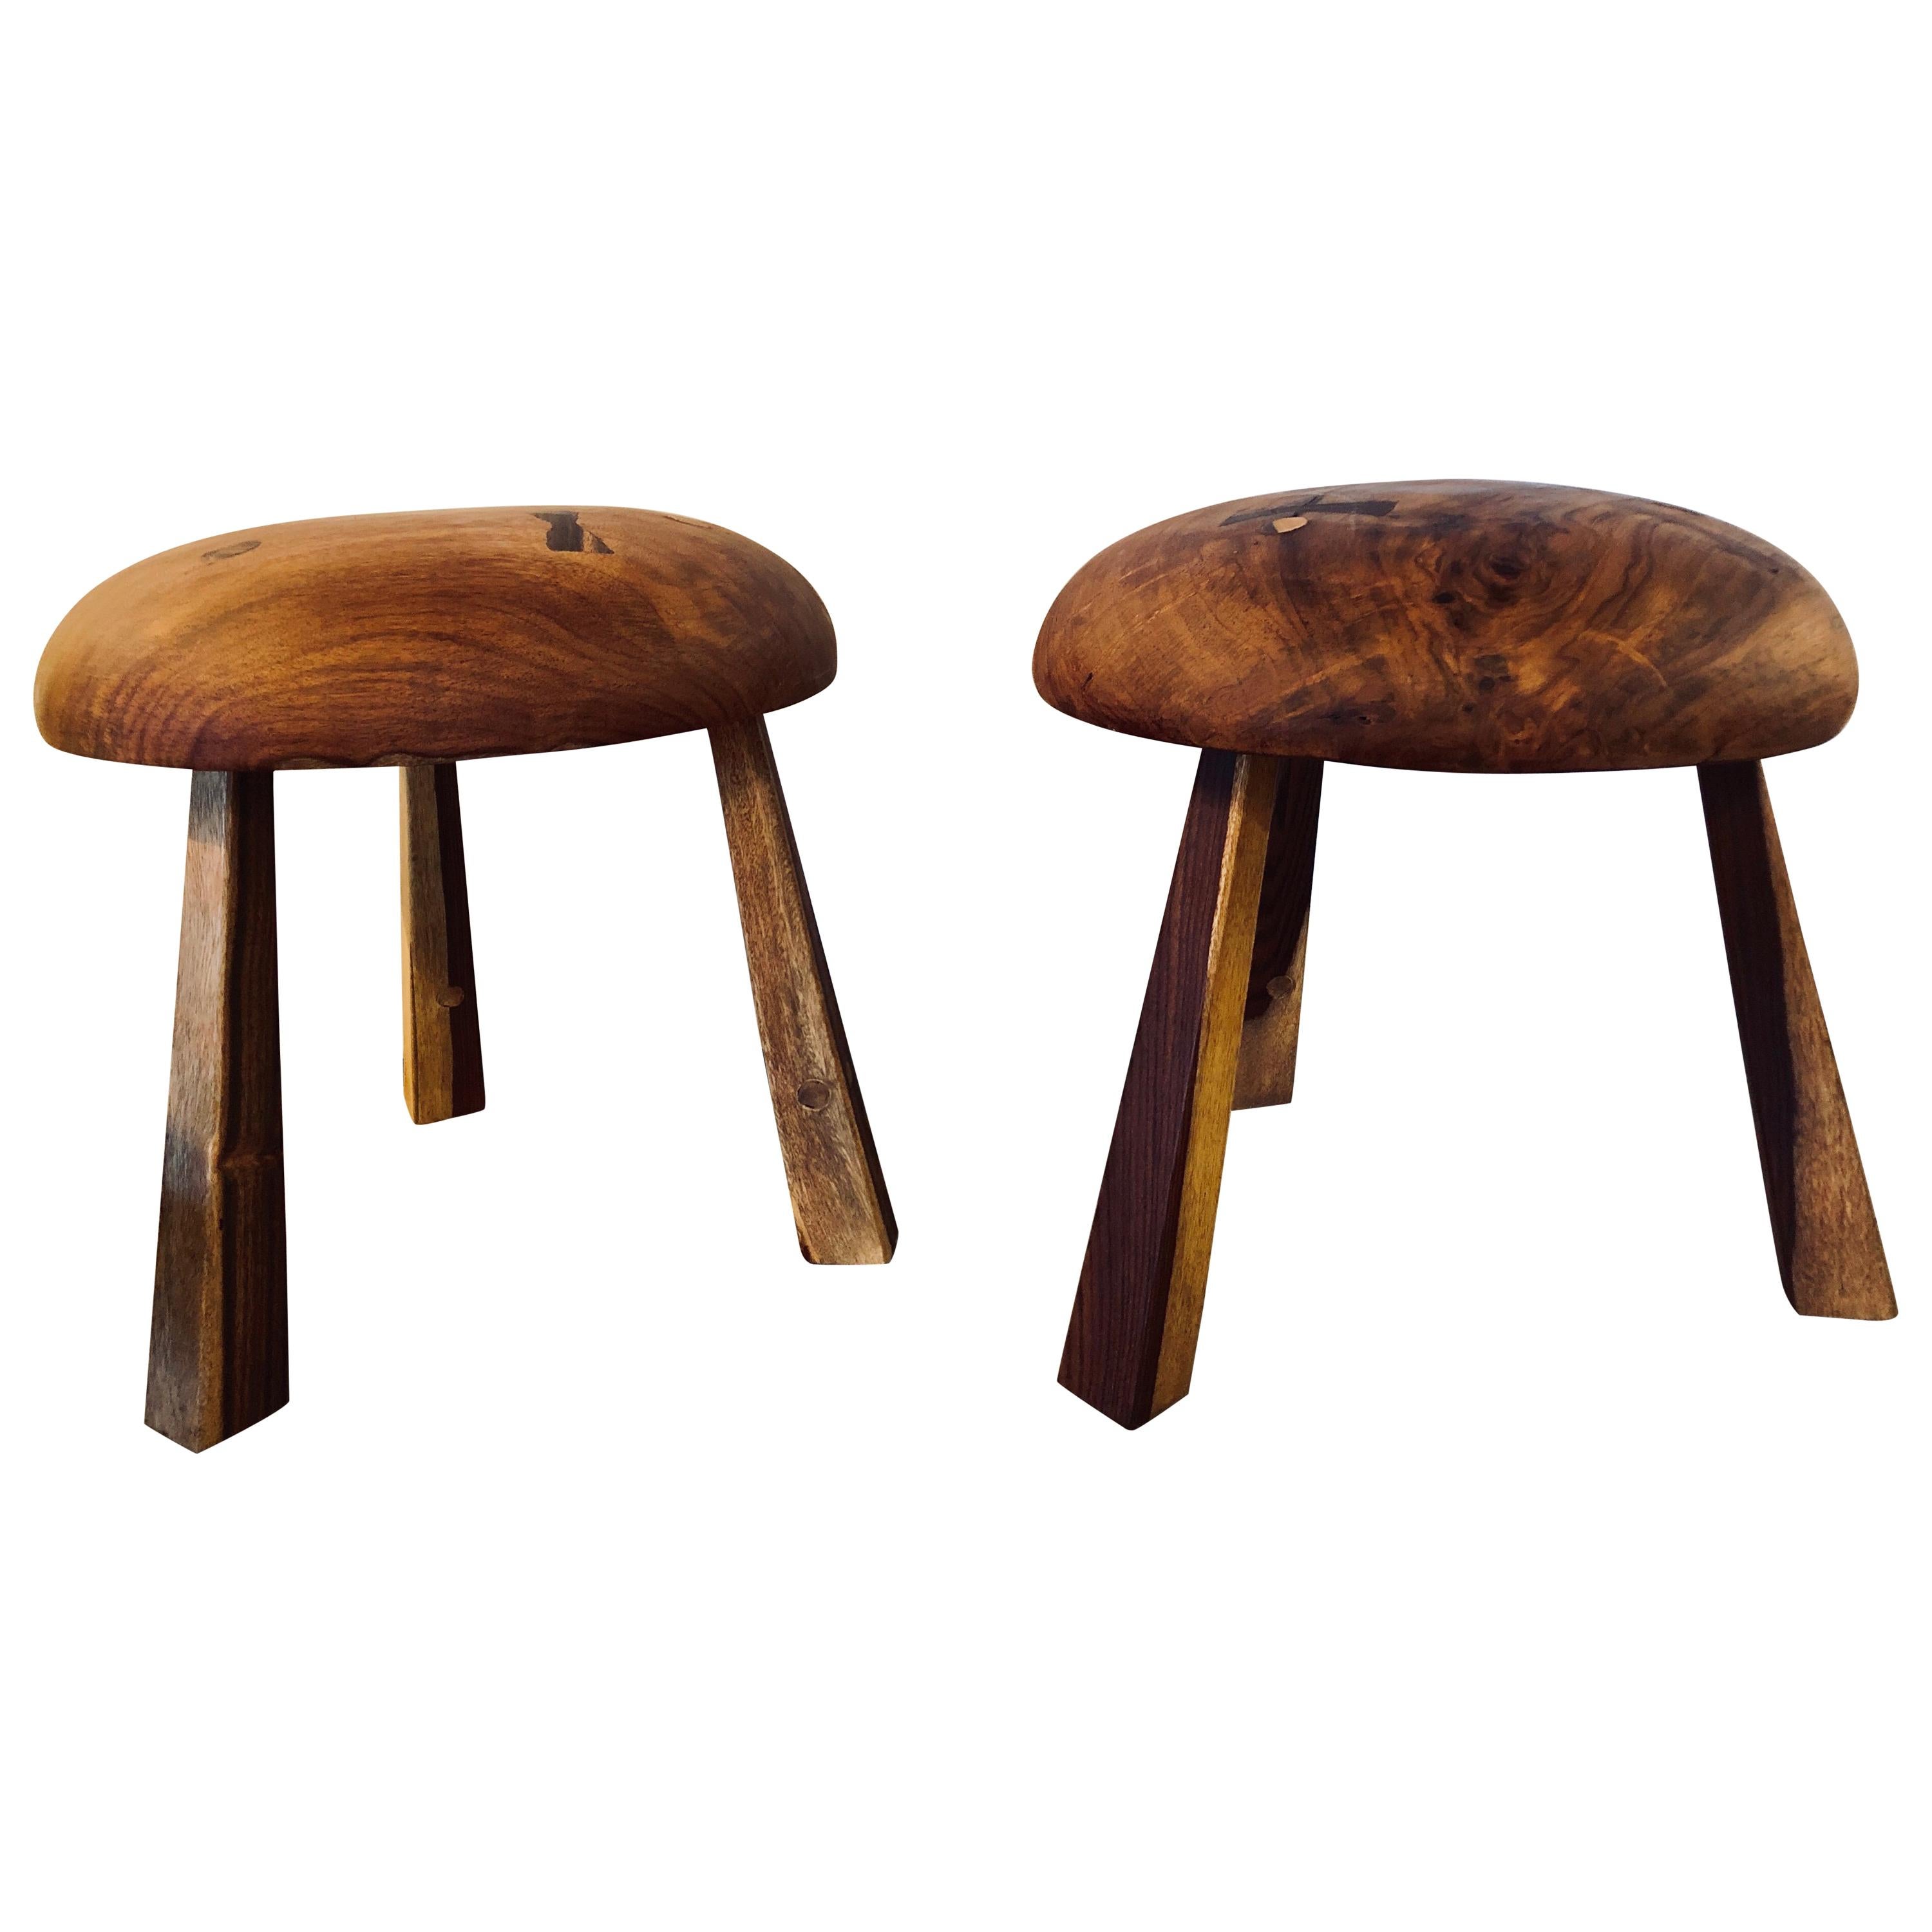 Pair of Small Wood Mushroom Stools in the Manner of Nakashima